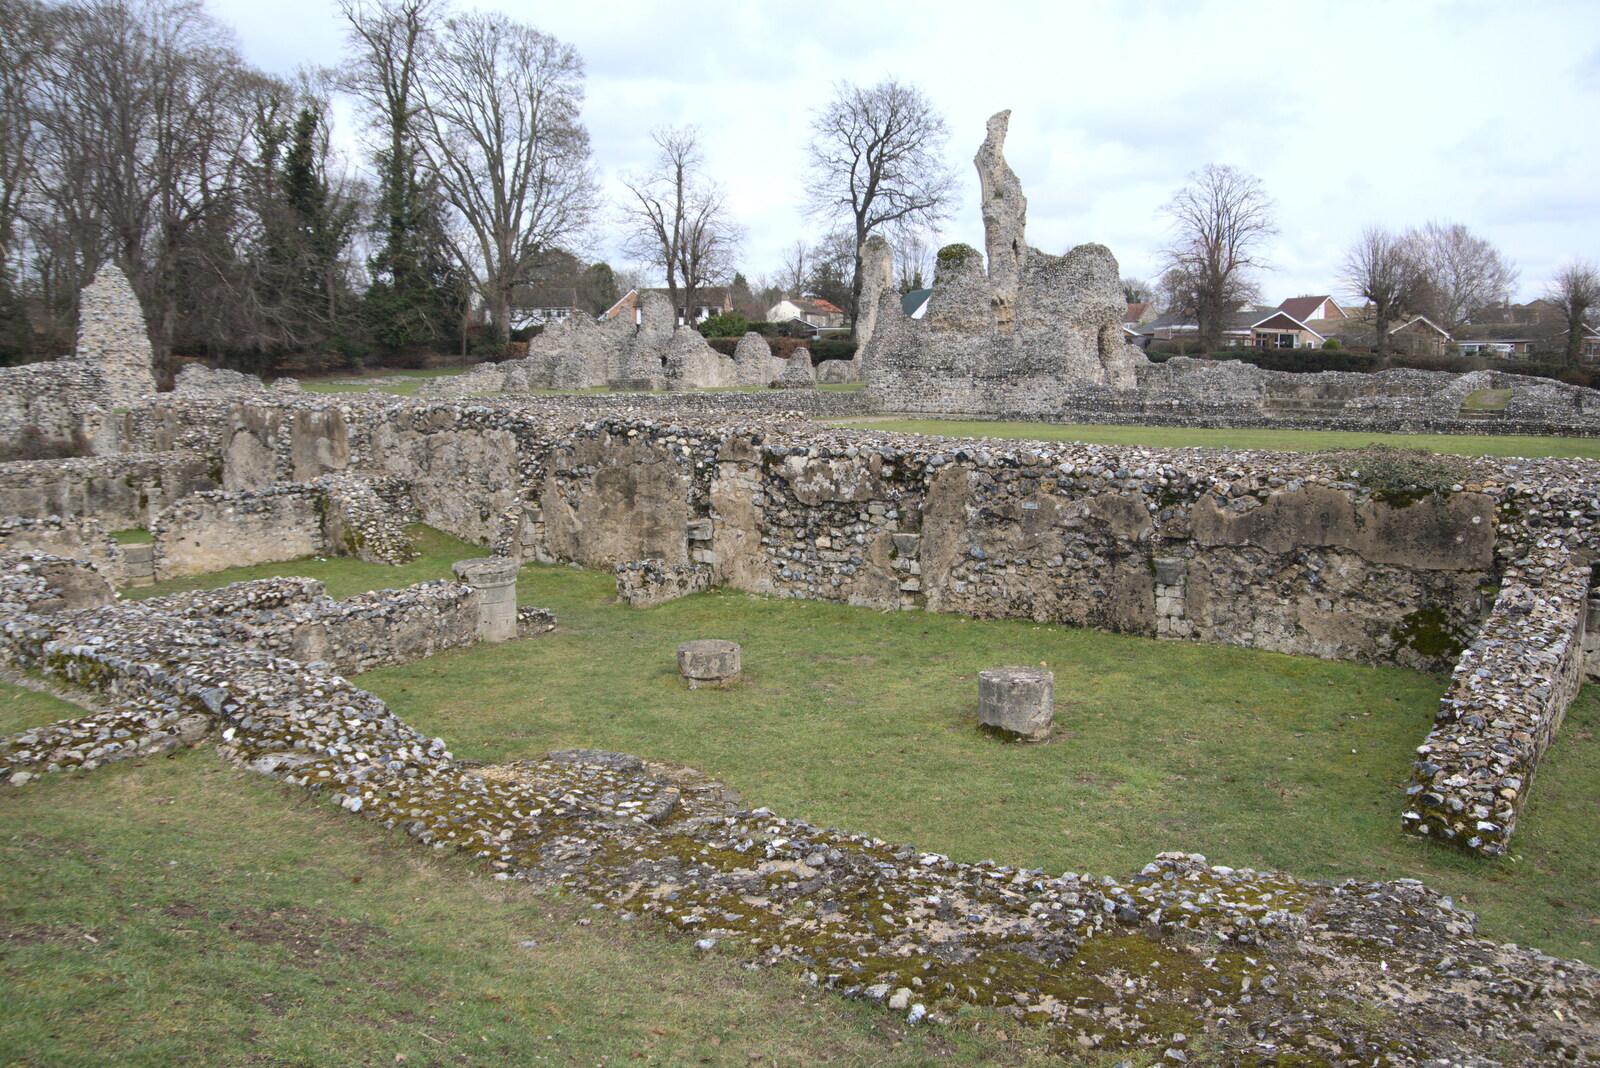 More ruins of the old abbey from A Postcard from Thetford, Norfolk - 15th March 2023